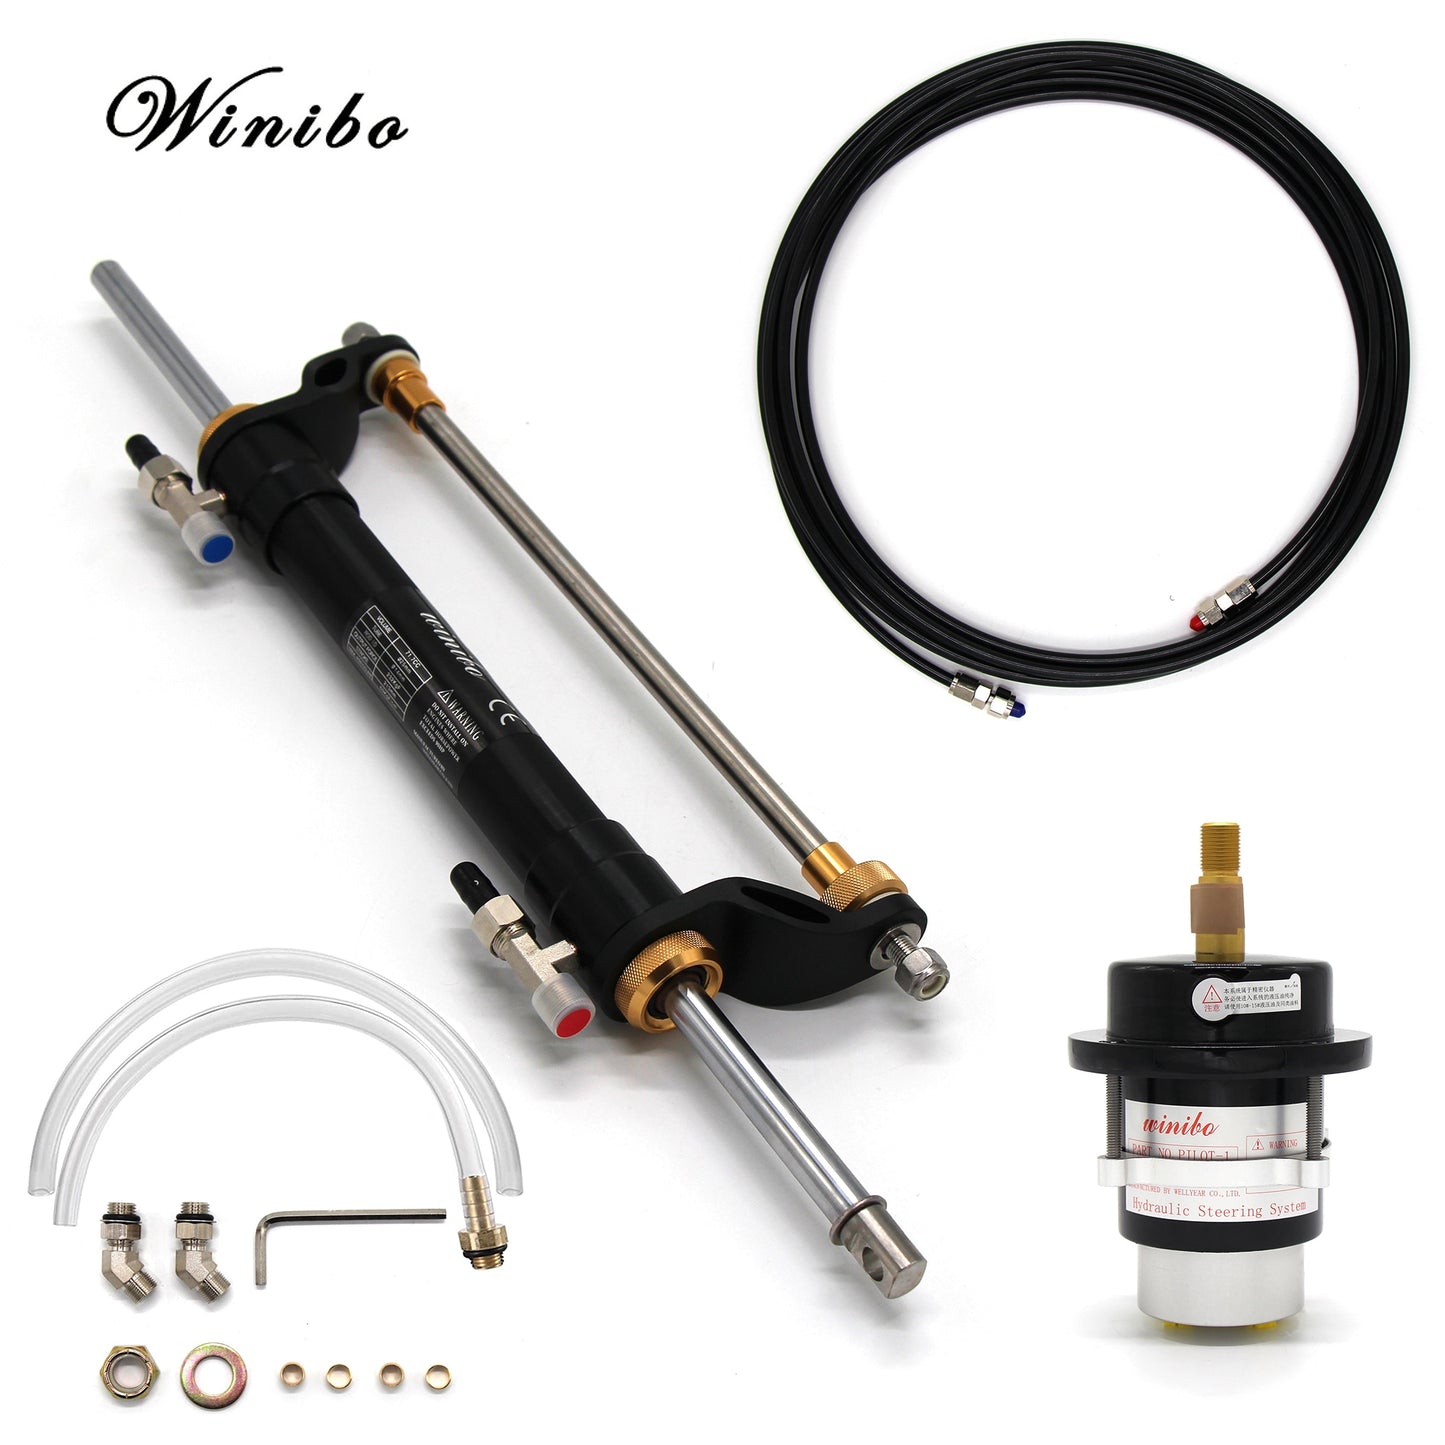 Winibo ZA0301 Boat Hydraulic Steering Kit for Outboard up to 90HP